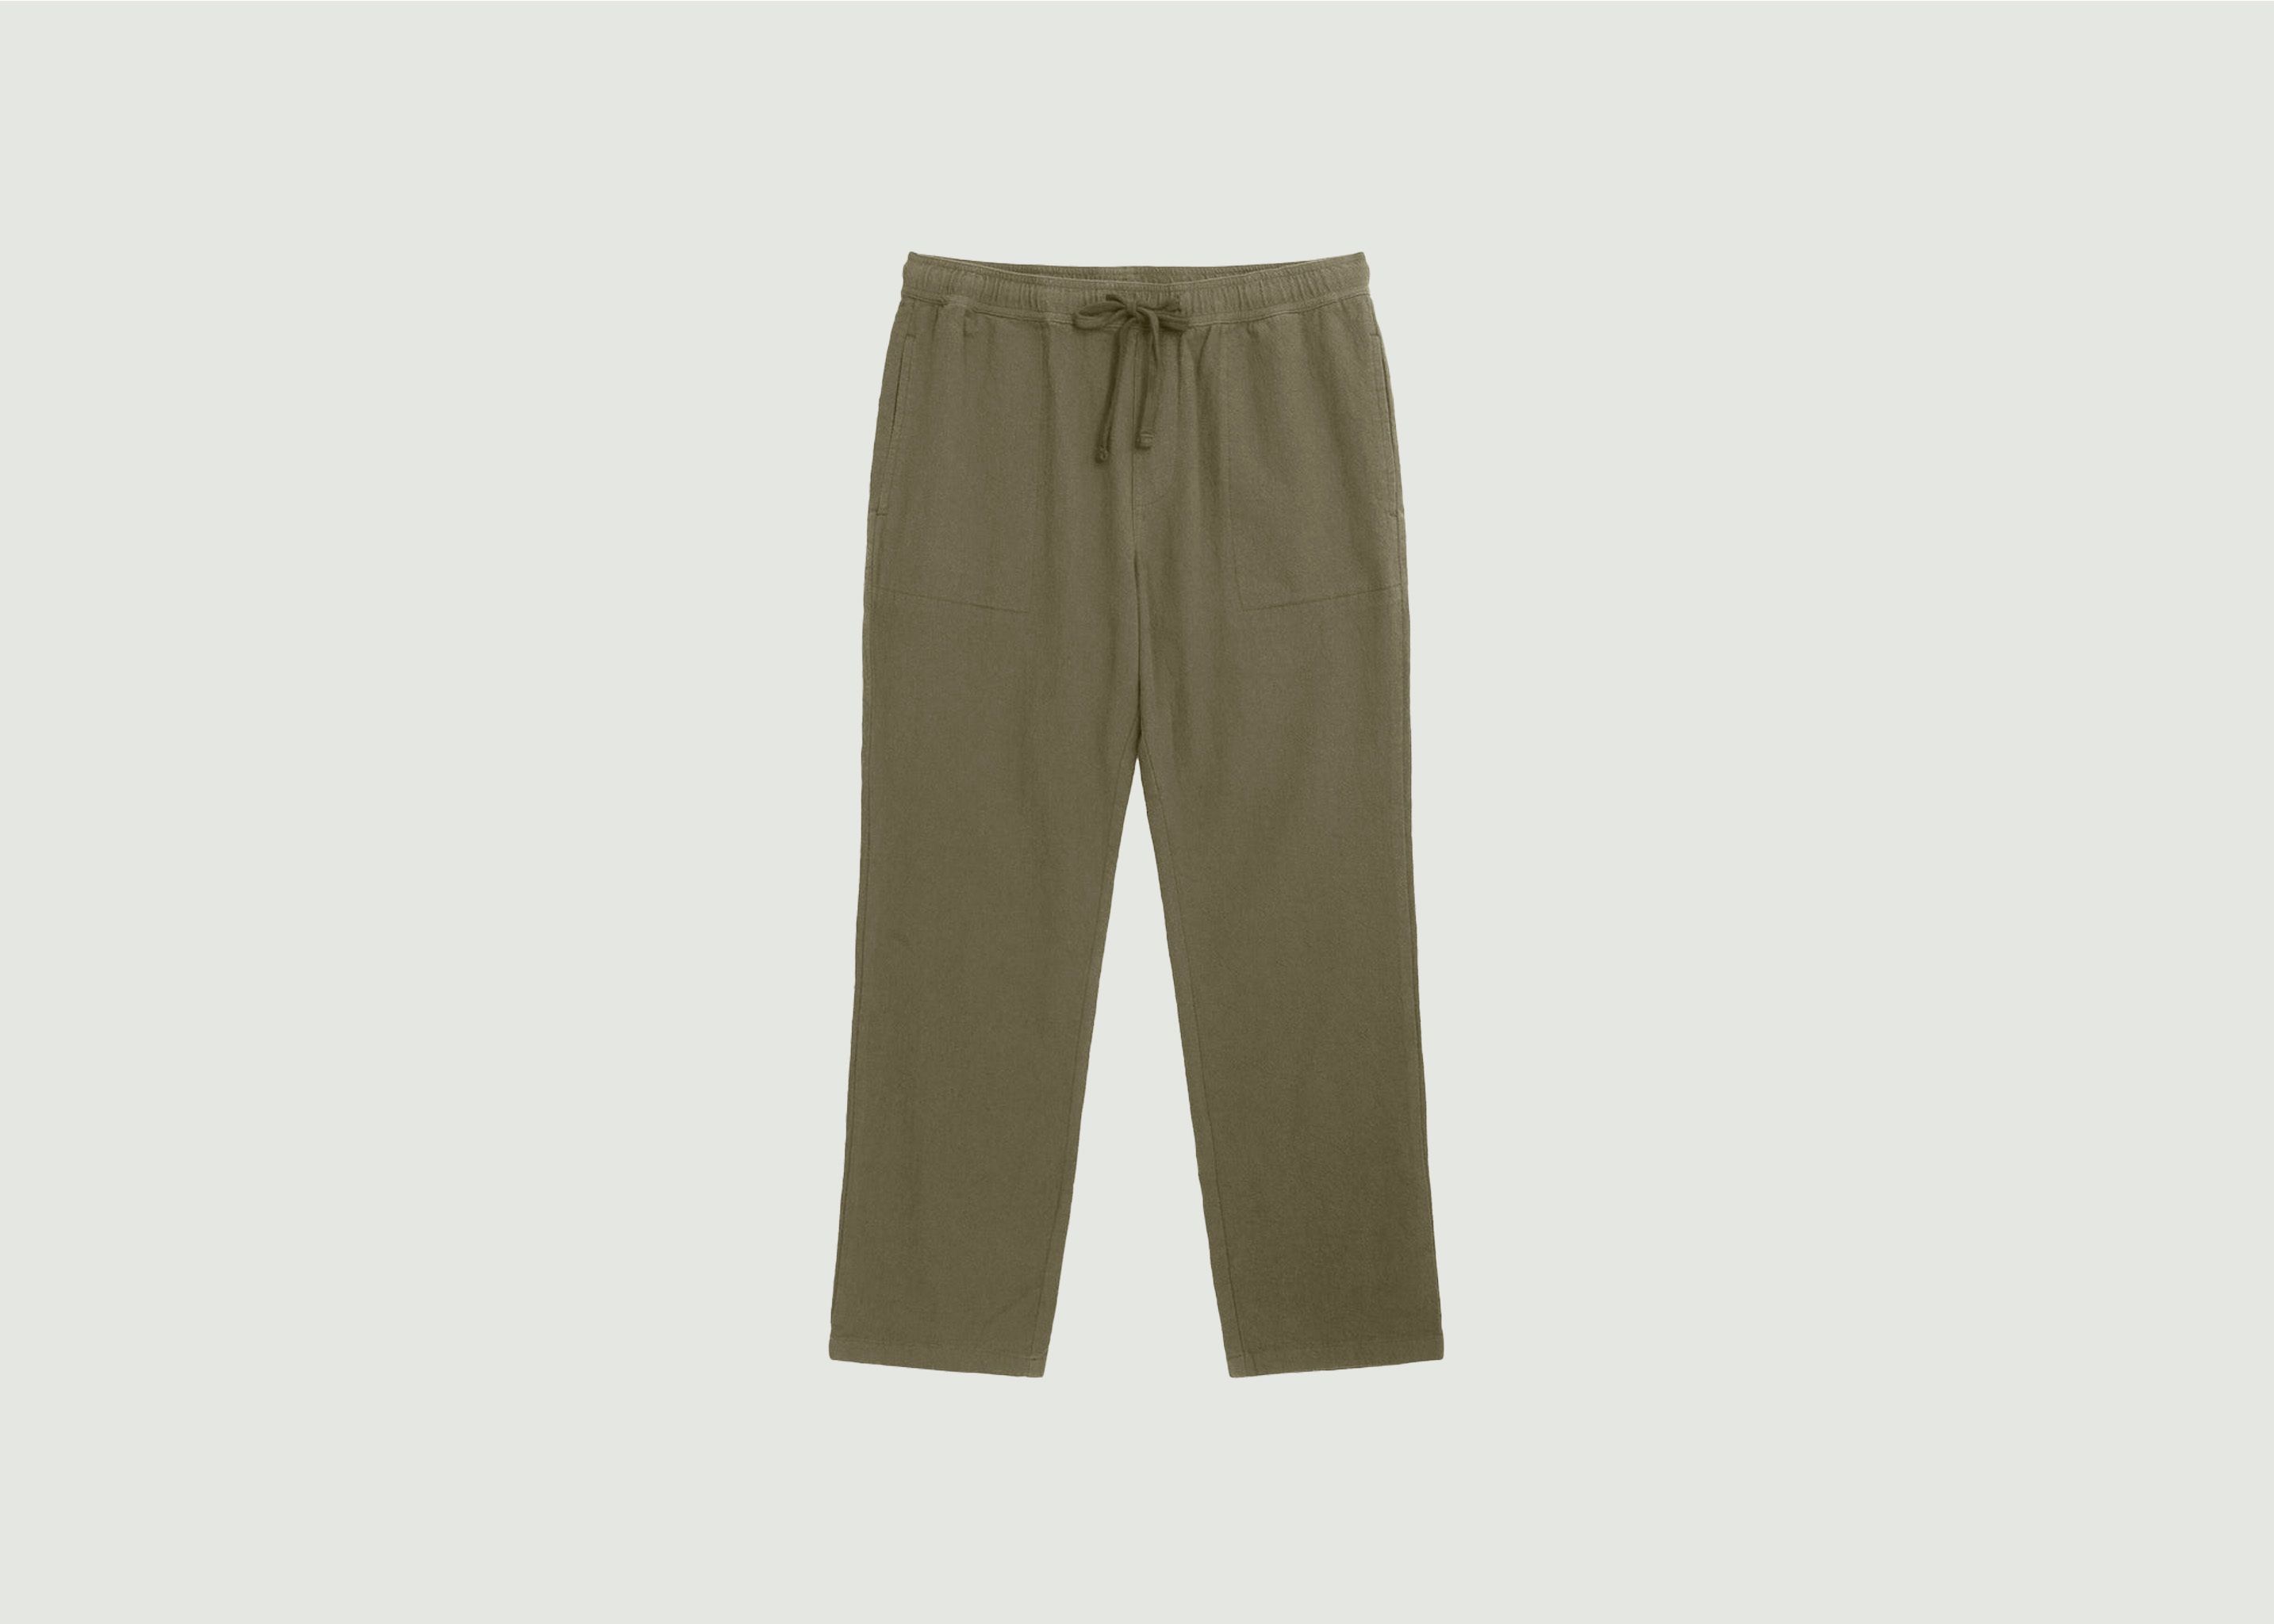 FIG loose-fitting pants in crushed cotton - KCA